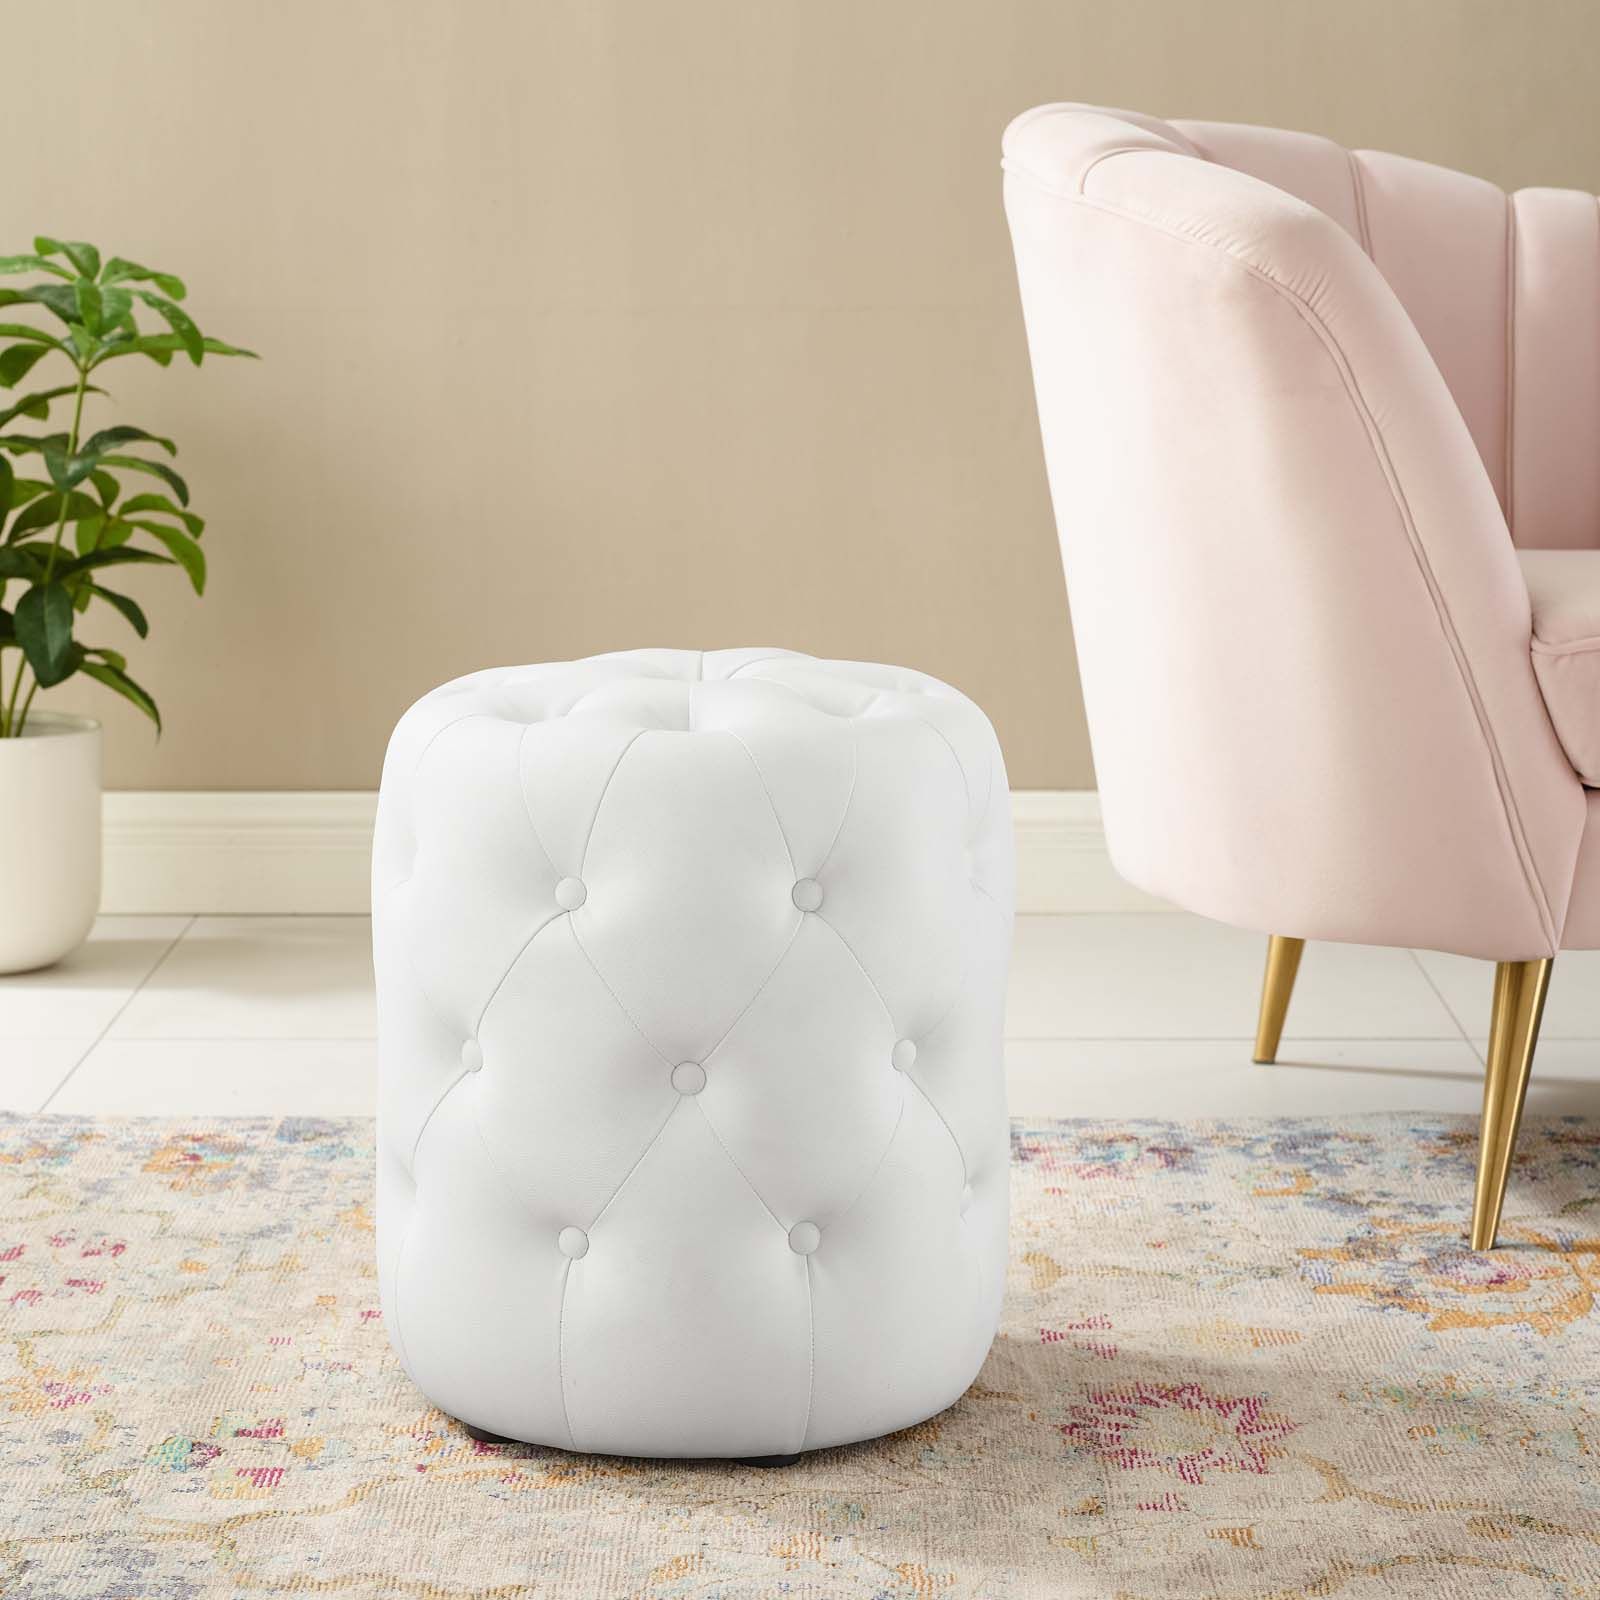 Best And Newest Round Gold Faux Leather Ottomans With Pull Tab Intended For Anthem Tufted Button Round Faux Leather Ottoman In White – Walmart (View 1 of 10)